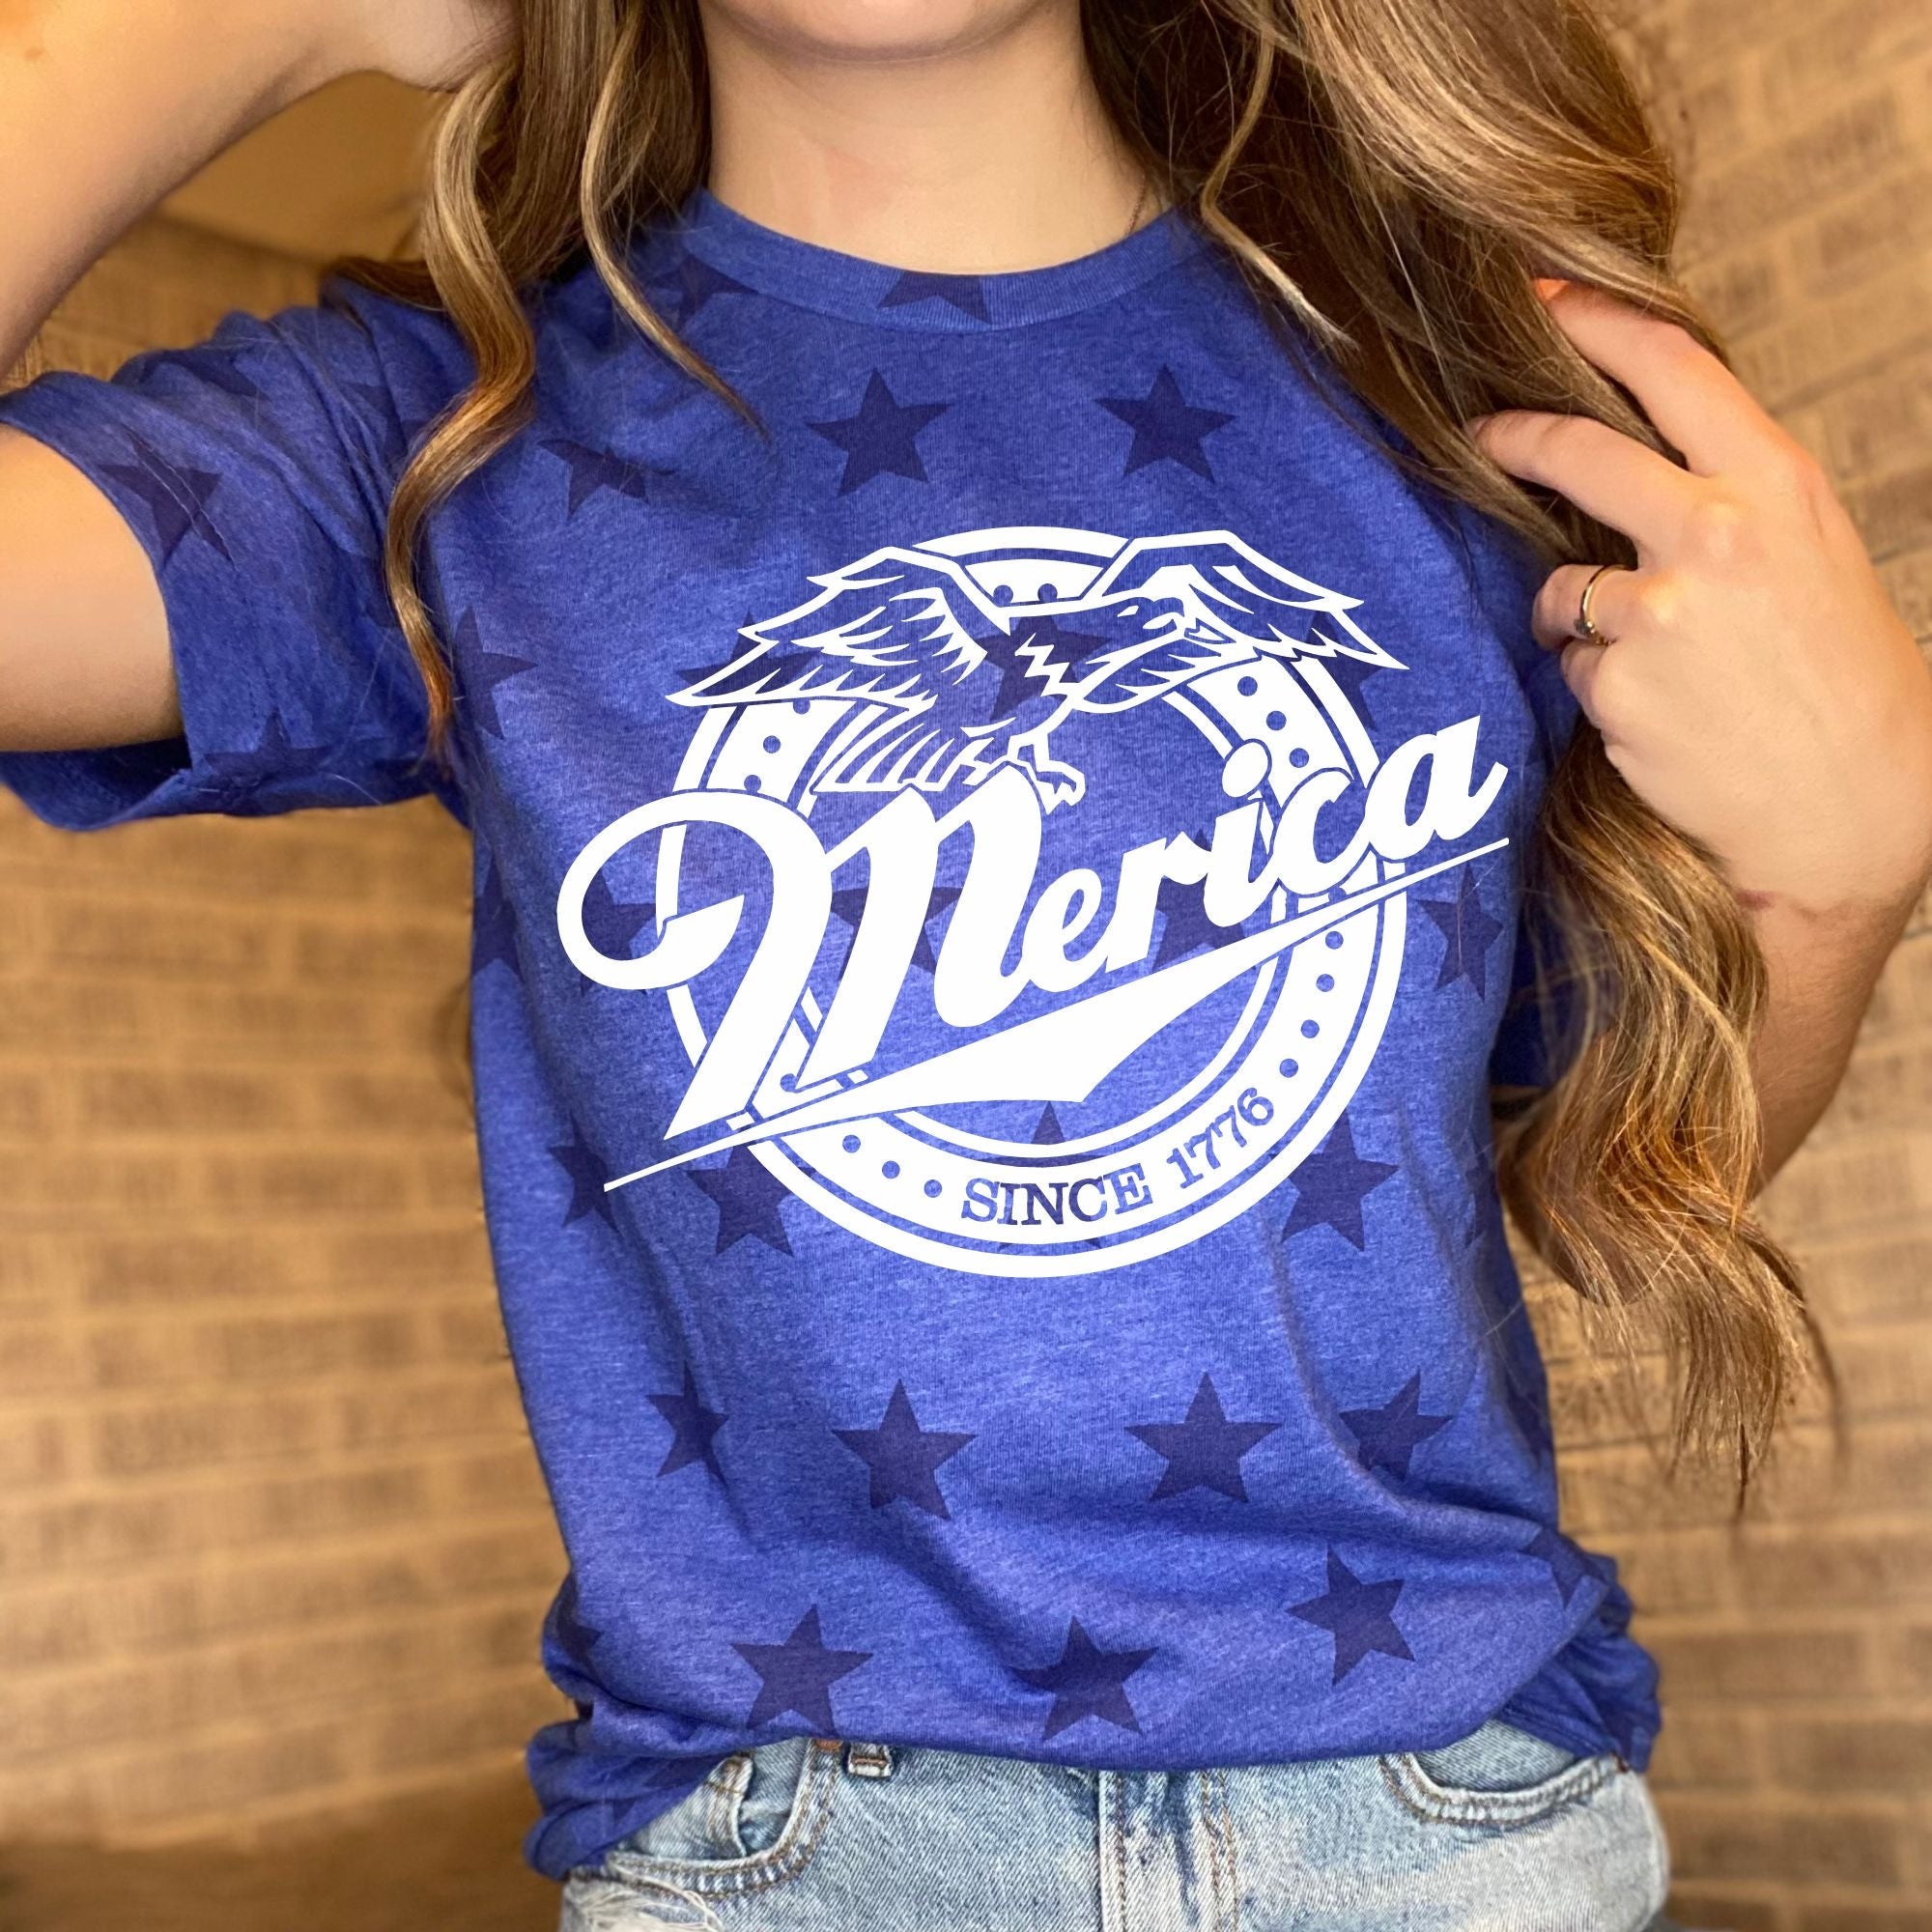 Merica Beer T Shirt for 4th Of July *UNISEX FIT*-Graphic Tees-208 Tees Wholesale, Idaho